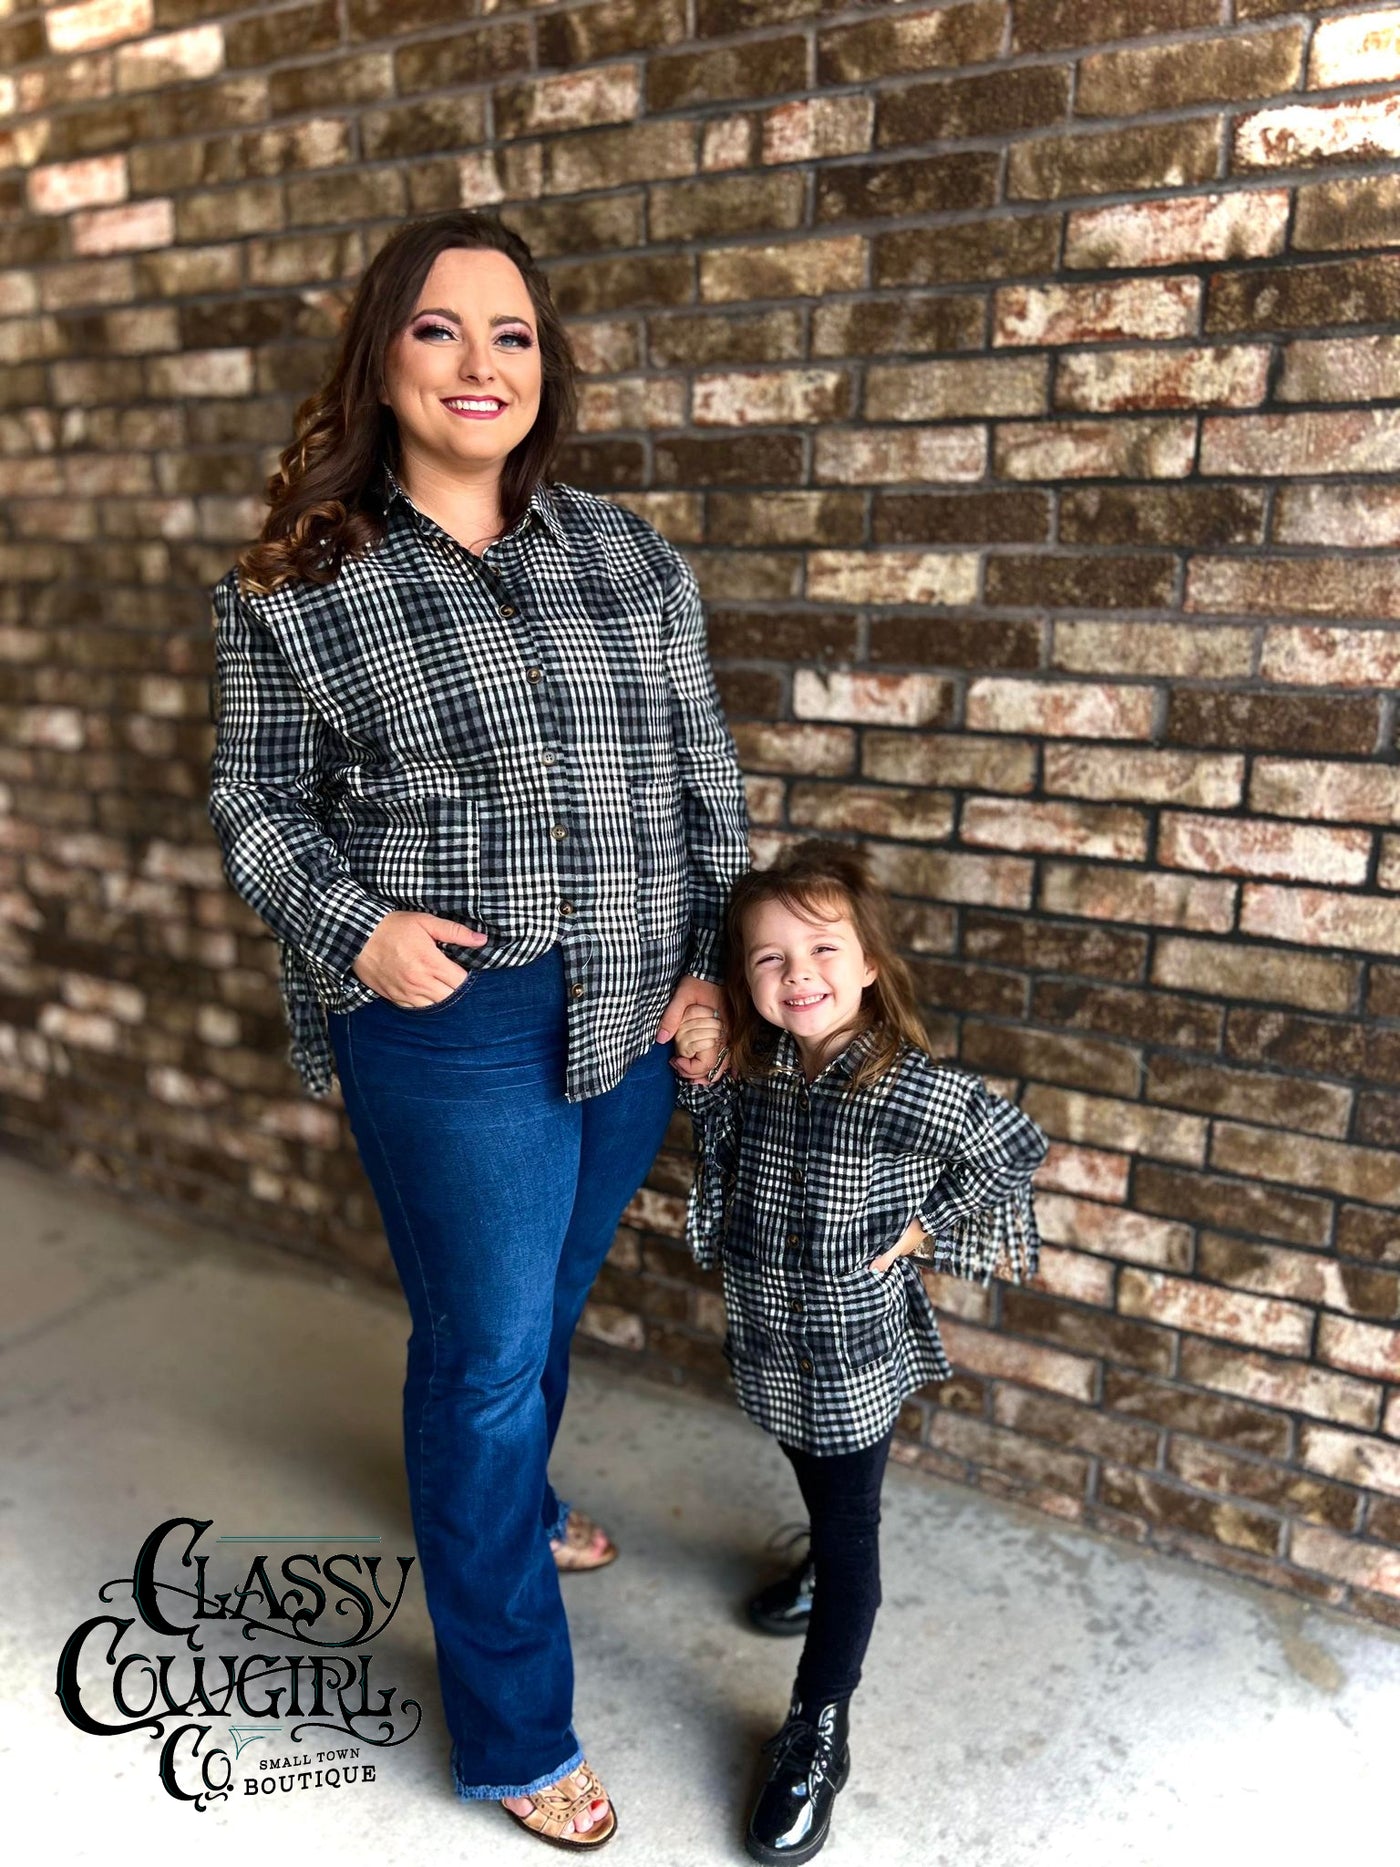 SALE- Back in Time Plaid Top with Fringe- Adult Size